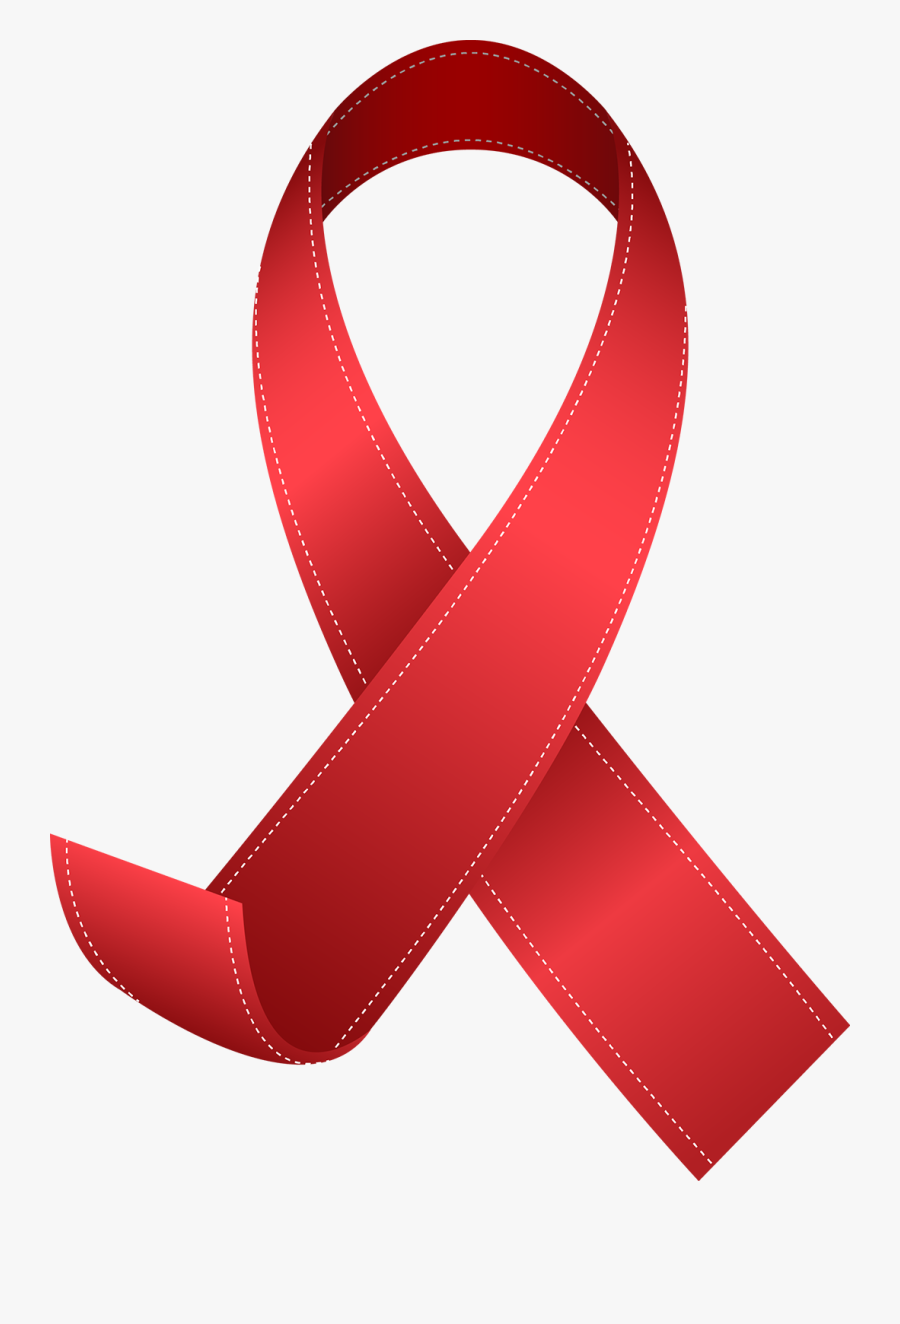 Hd World Day Free - Red Ribbon Hiv Png, Transparent Clipart